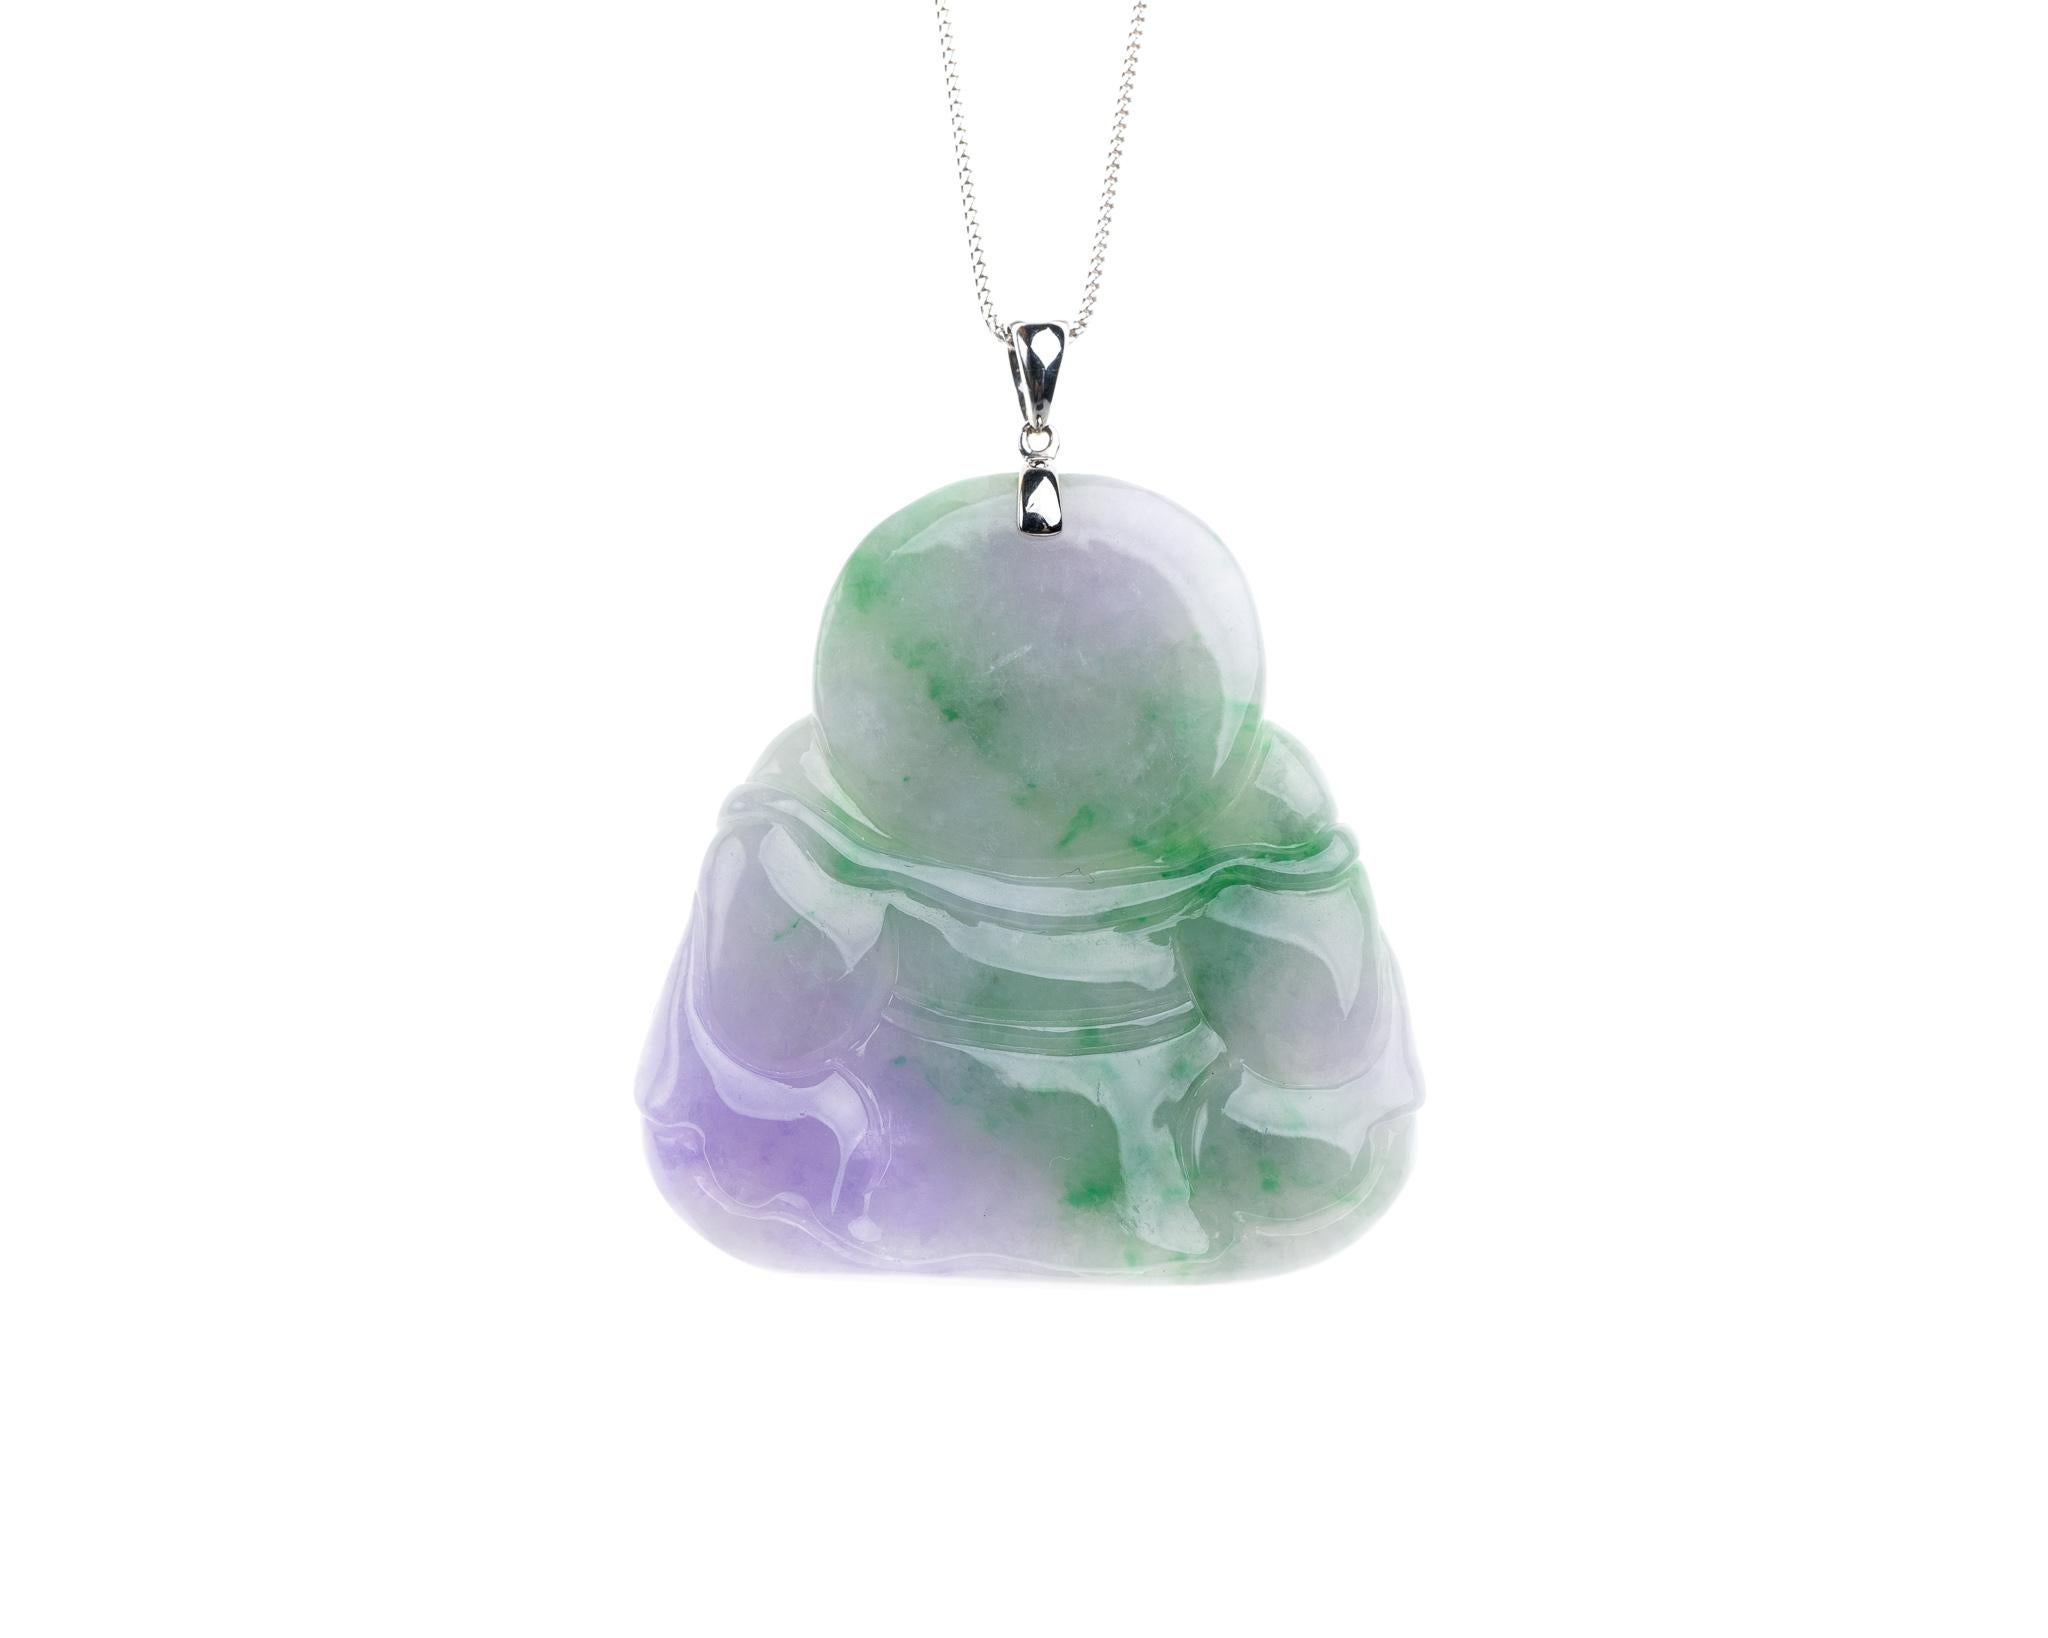 This all natural lavender and green jadeite jade carved happy buddha is set in 18K white gold.  

The jadeite jade buddha measures 1.87 inches (47.6mm) x 1.95 inches (49.6mm) with thickness of 0.36 inches (9.1mm)

Included is a Hong Kong Gems